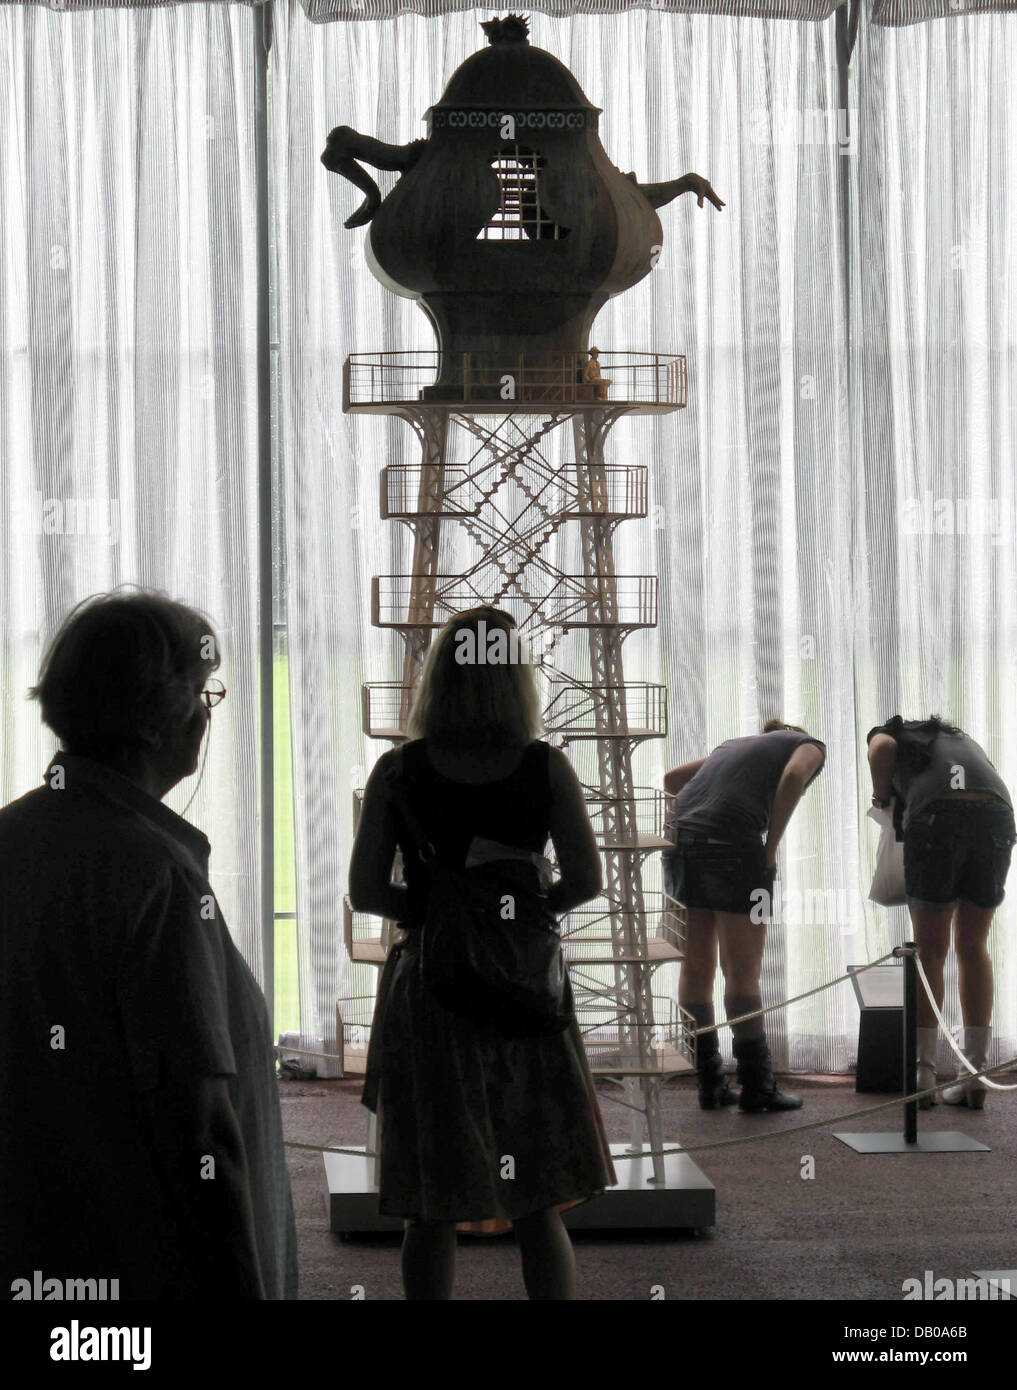 Visitors look at exhibit 'Celestial Teapot' by Lukas Duwenhoegger at the 'Aue-Pavillion' of documenta 12 art exhibition in Kassel, Germany, 24 July 2007. Documenta art exhibtion is regarded as the world's largest and most important regular exhibition of contemporaray art. Photo: Frank Rumpenhorst Stock Photo